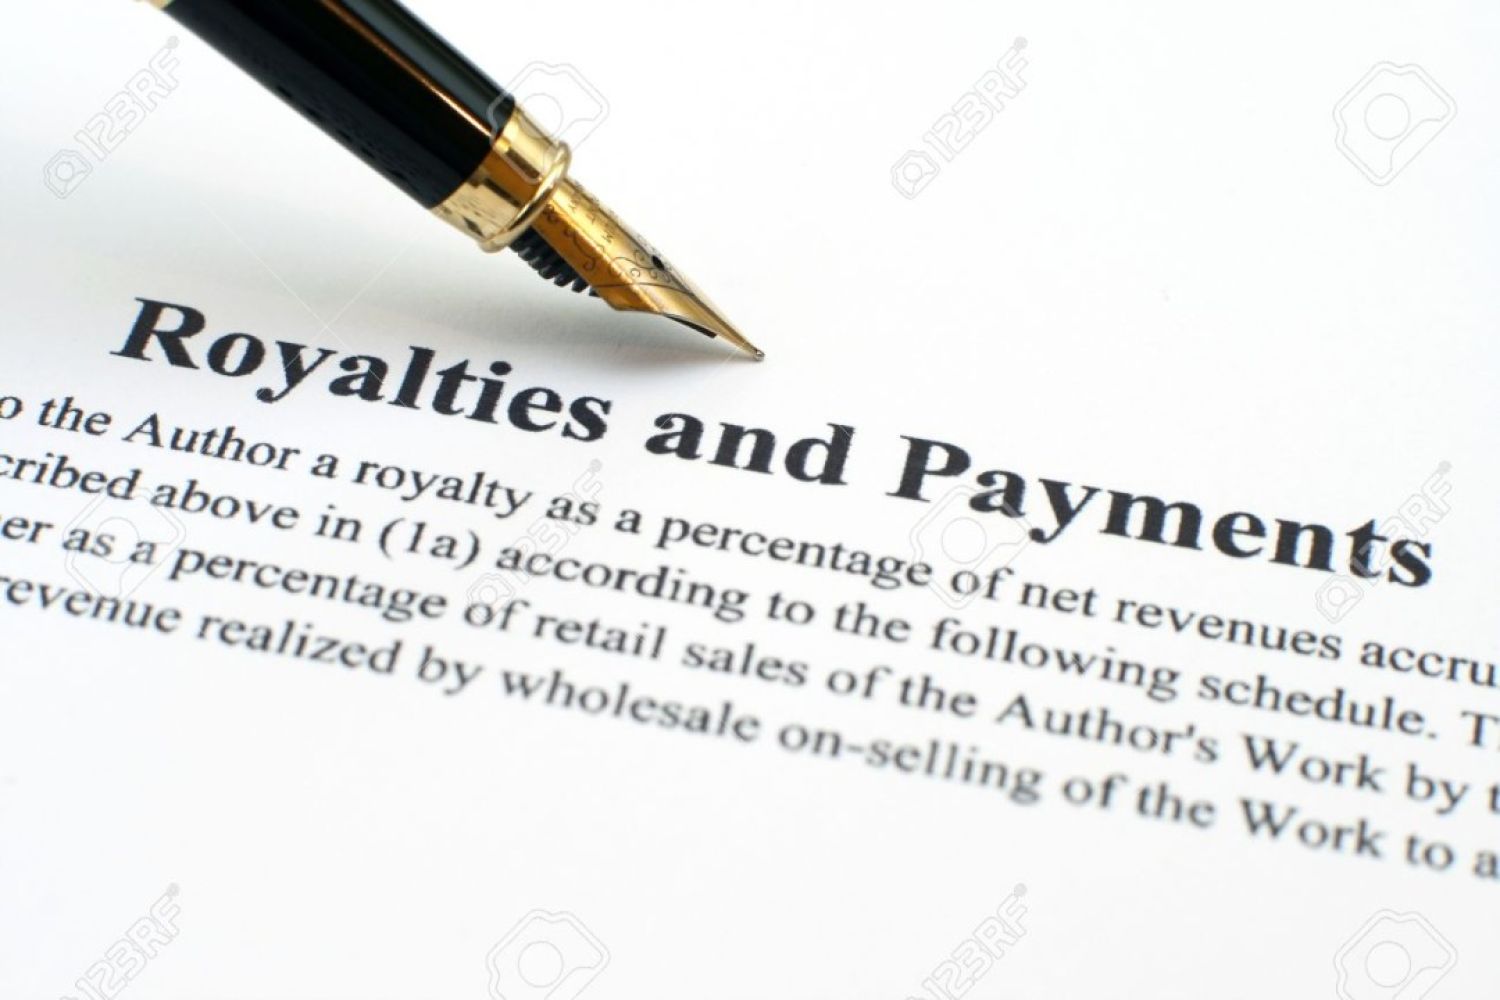 Payment made for official Sponsor/Promotion objective is not consider royalty